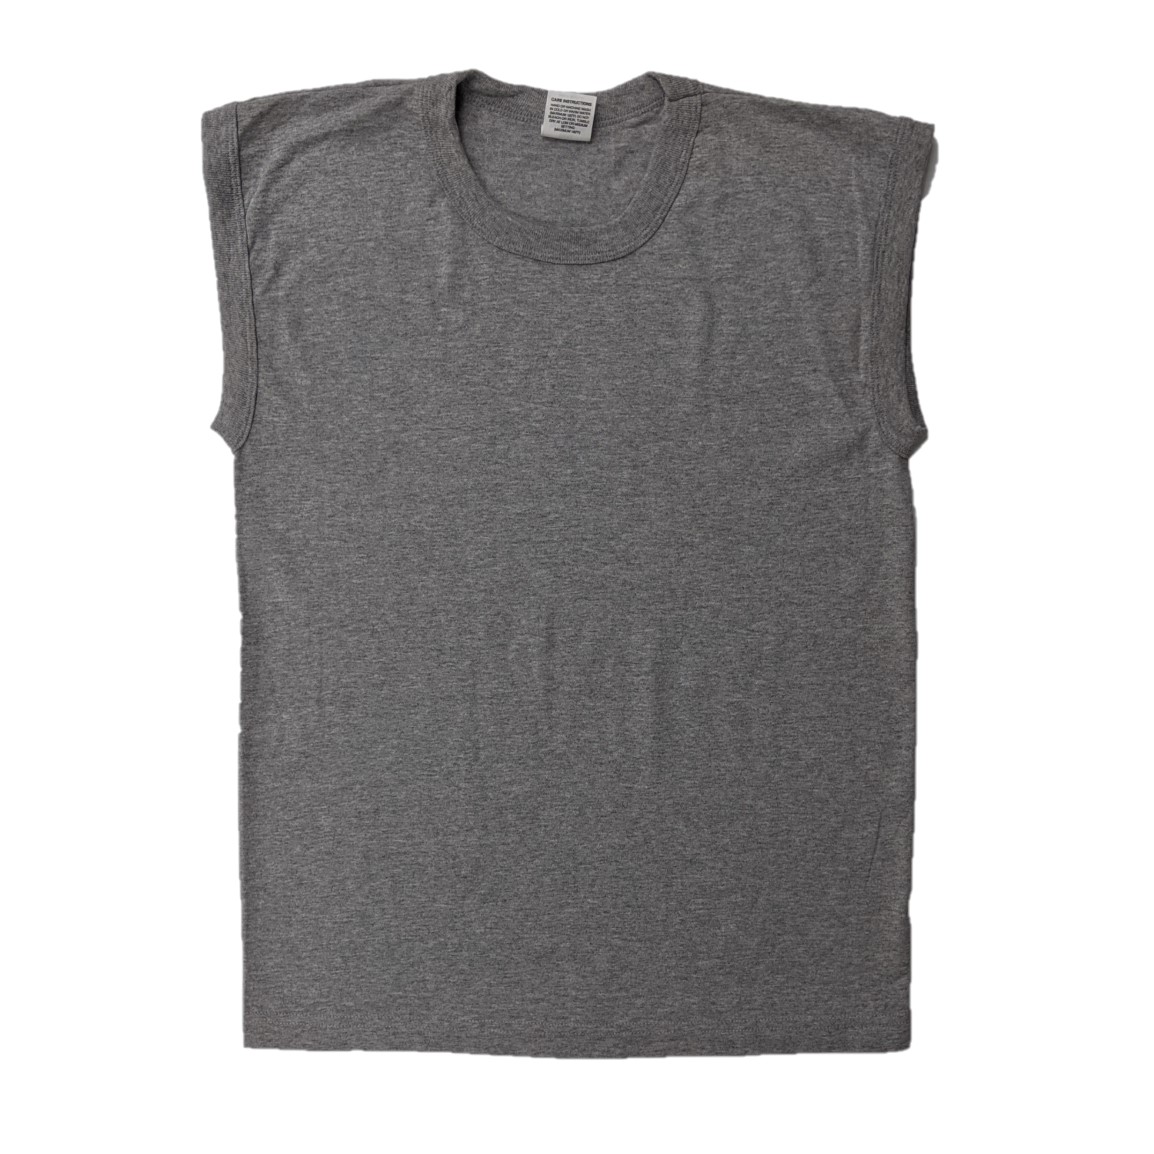 McGuire Gear Men's Muscle T-shirt, Made in USA Summer, Gym, and Workout Apparel - image 1 of 2